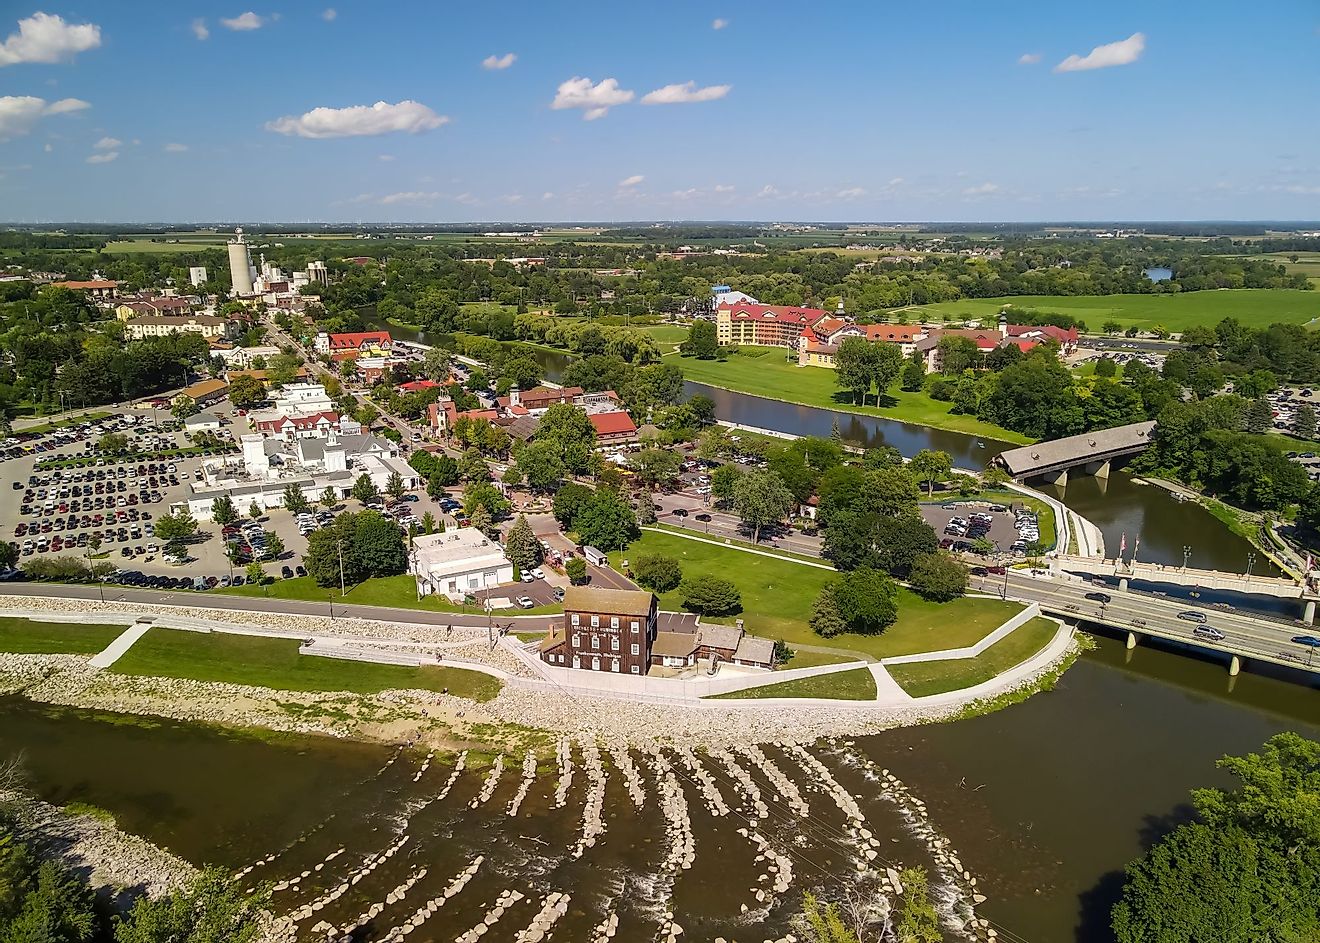 Aerial view of Frankenmuth city in Michigan. Editorial credit: SNEHIT PHOTO / Shutterstock.com